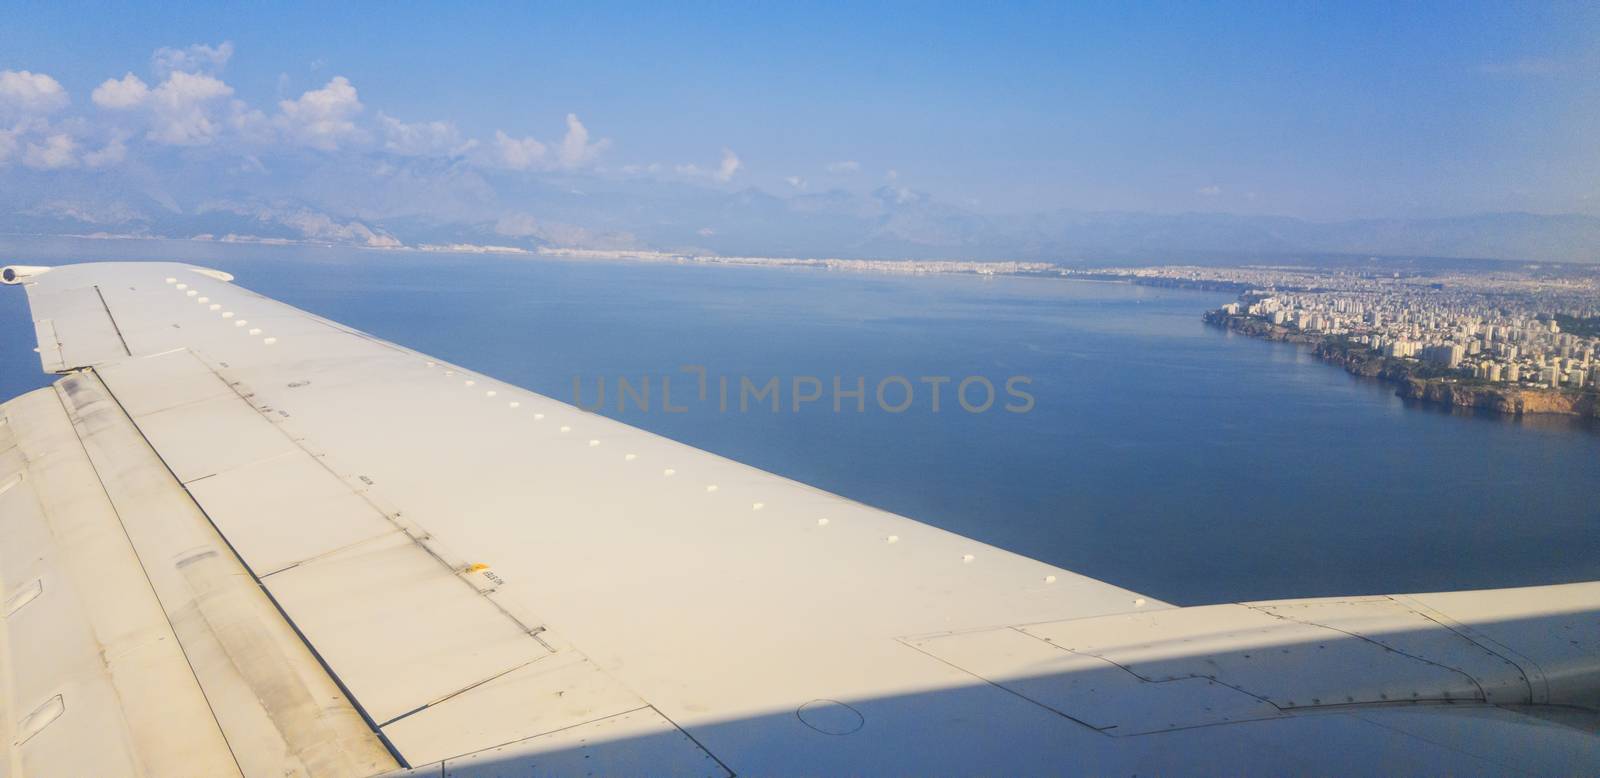 Plane flying over the sea prepairing for land to Antalya, Turkey. Rocky coast of the Mediterranean Sea and modern buildings in the city